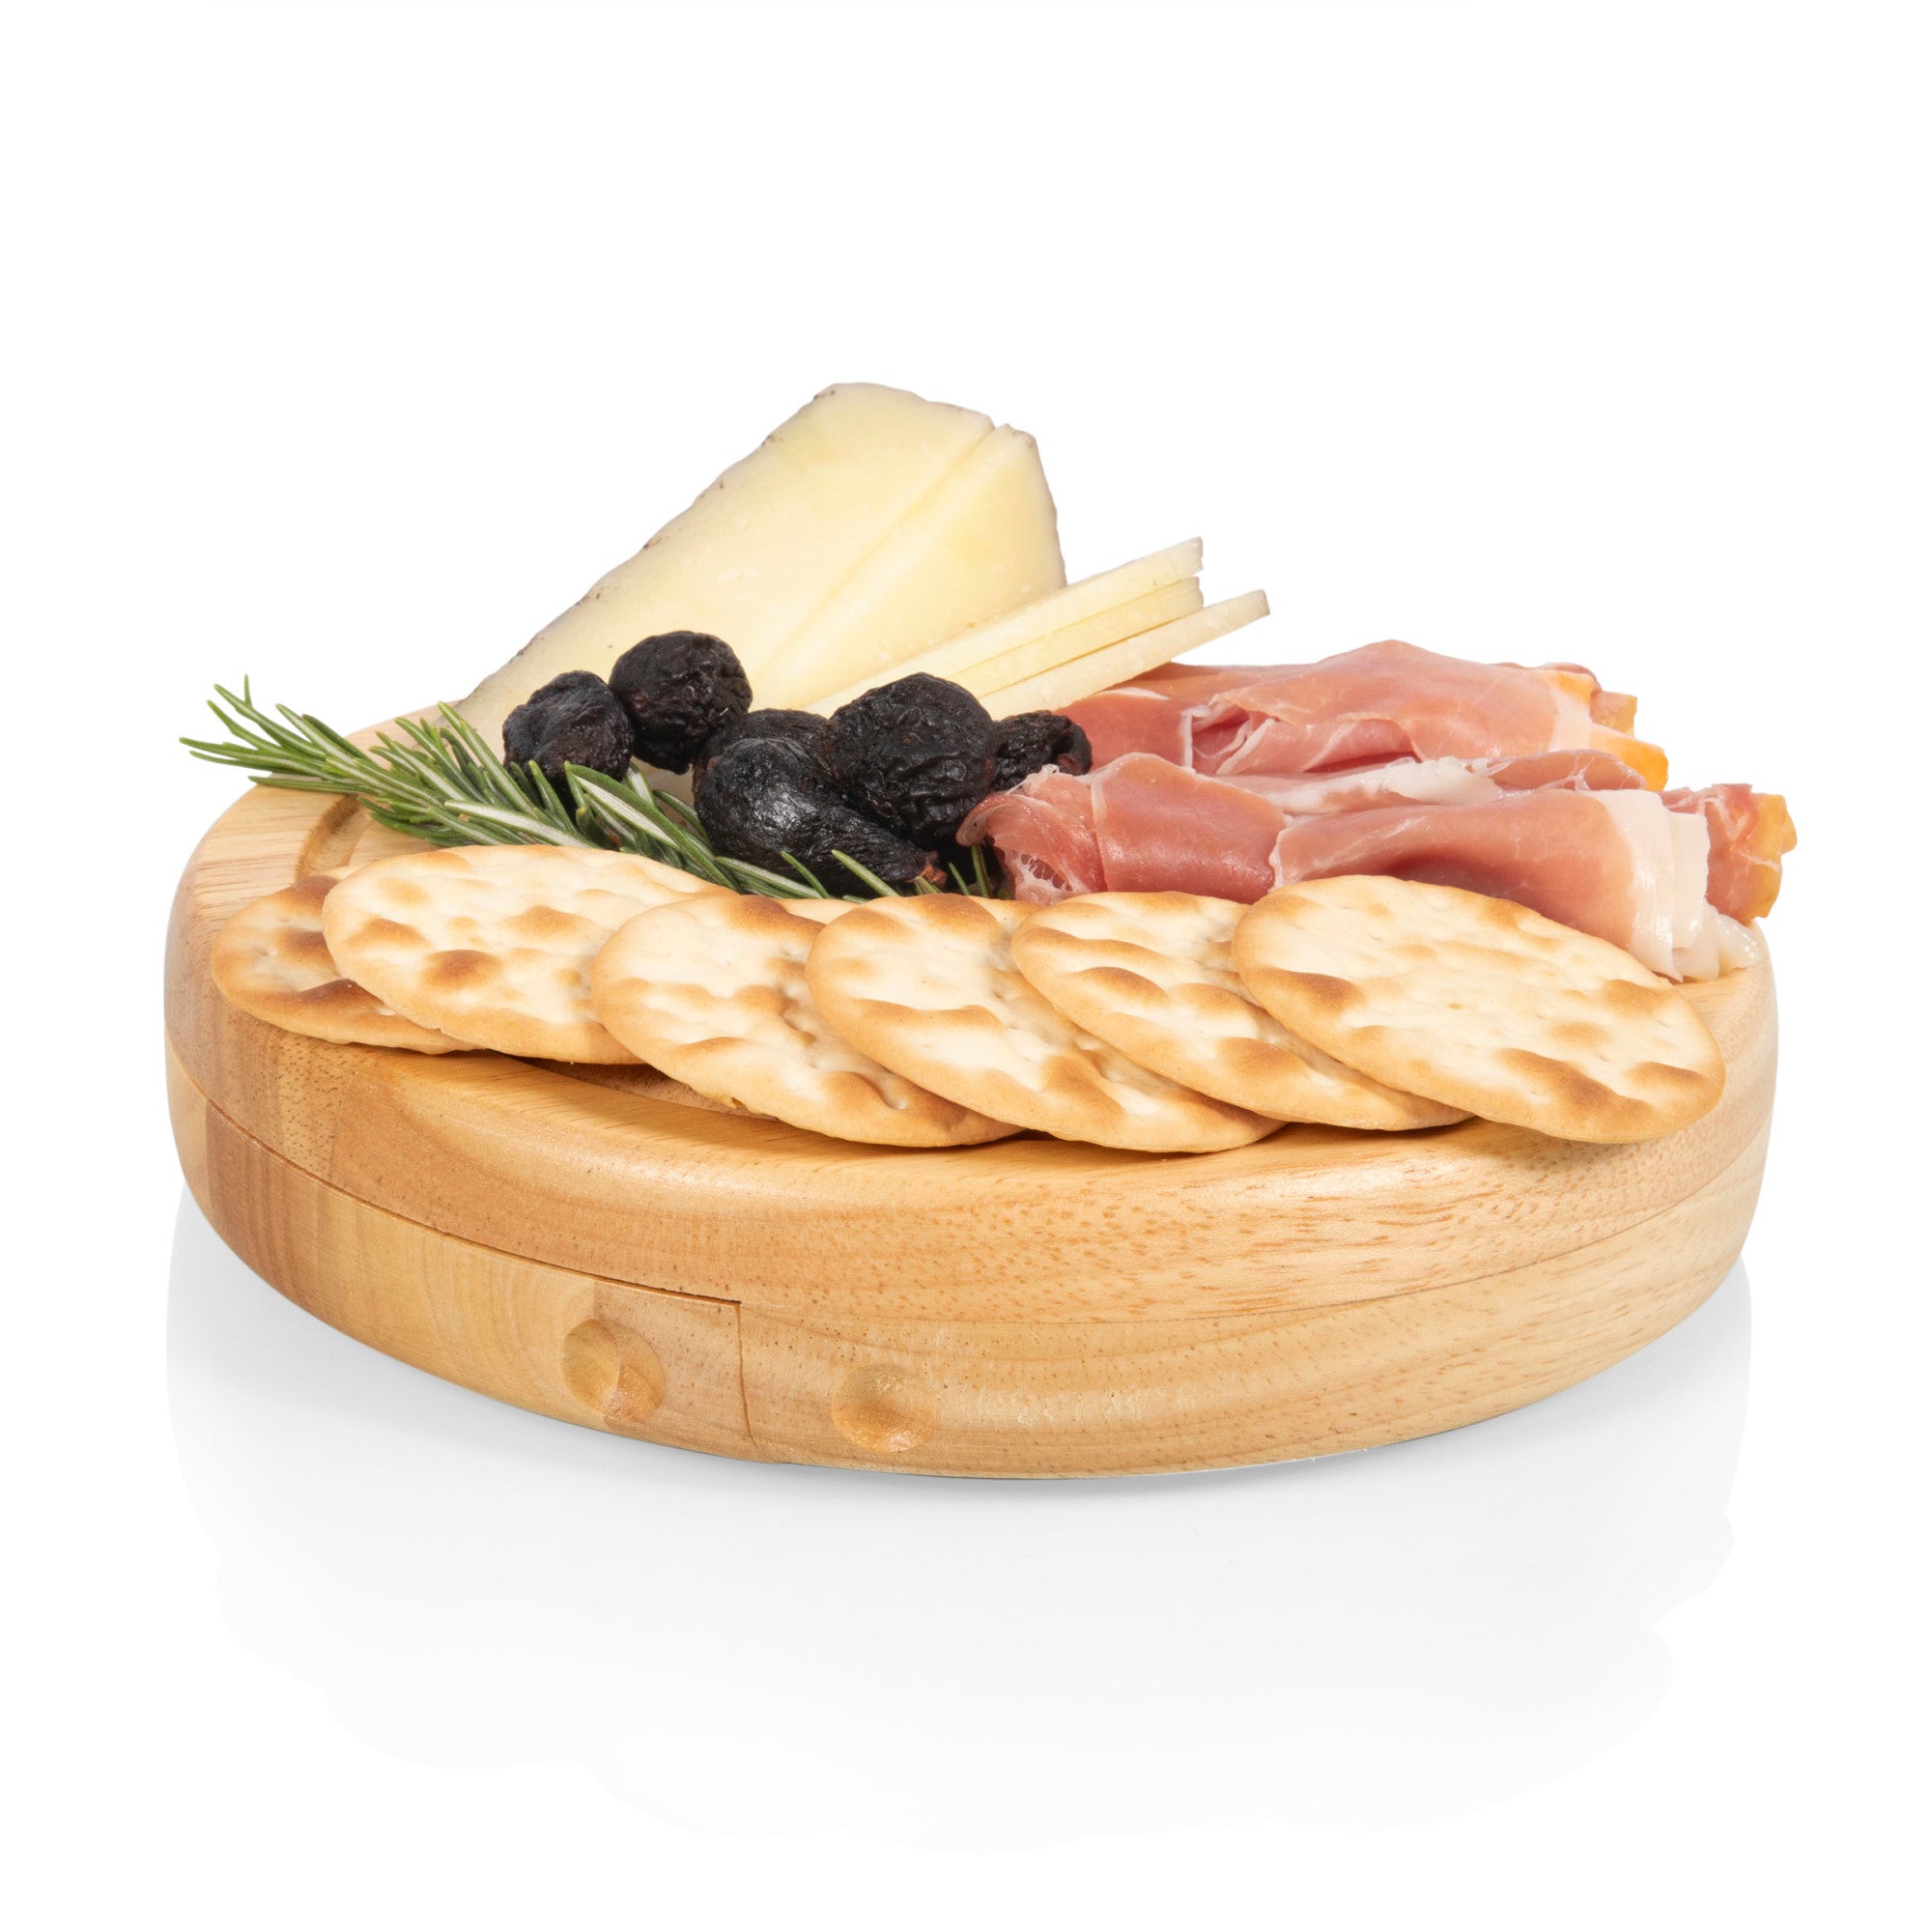 Oakland Athletics - Brie Cheese Cutting Board & Tools Set